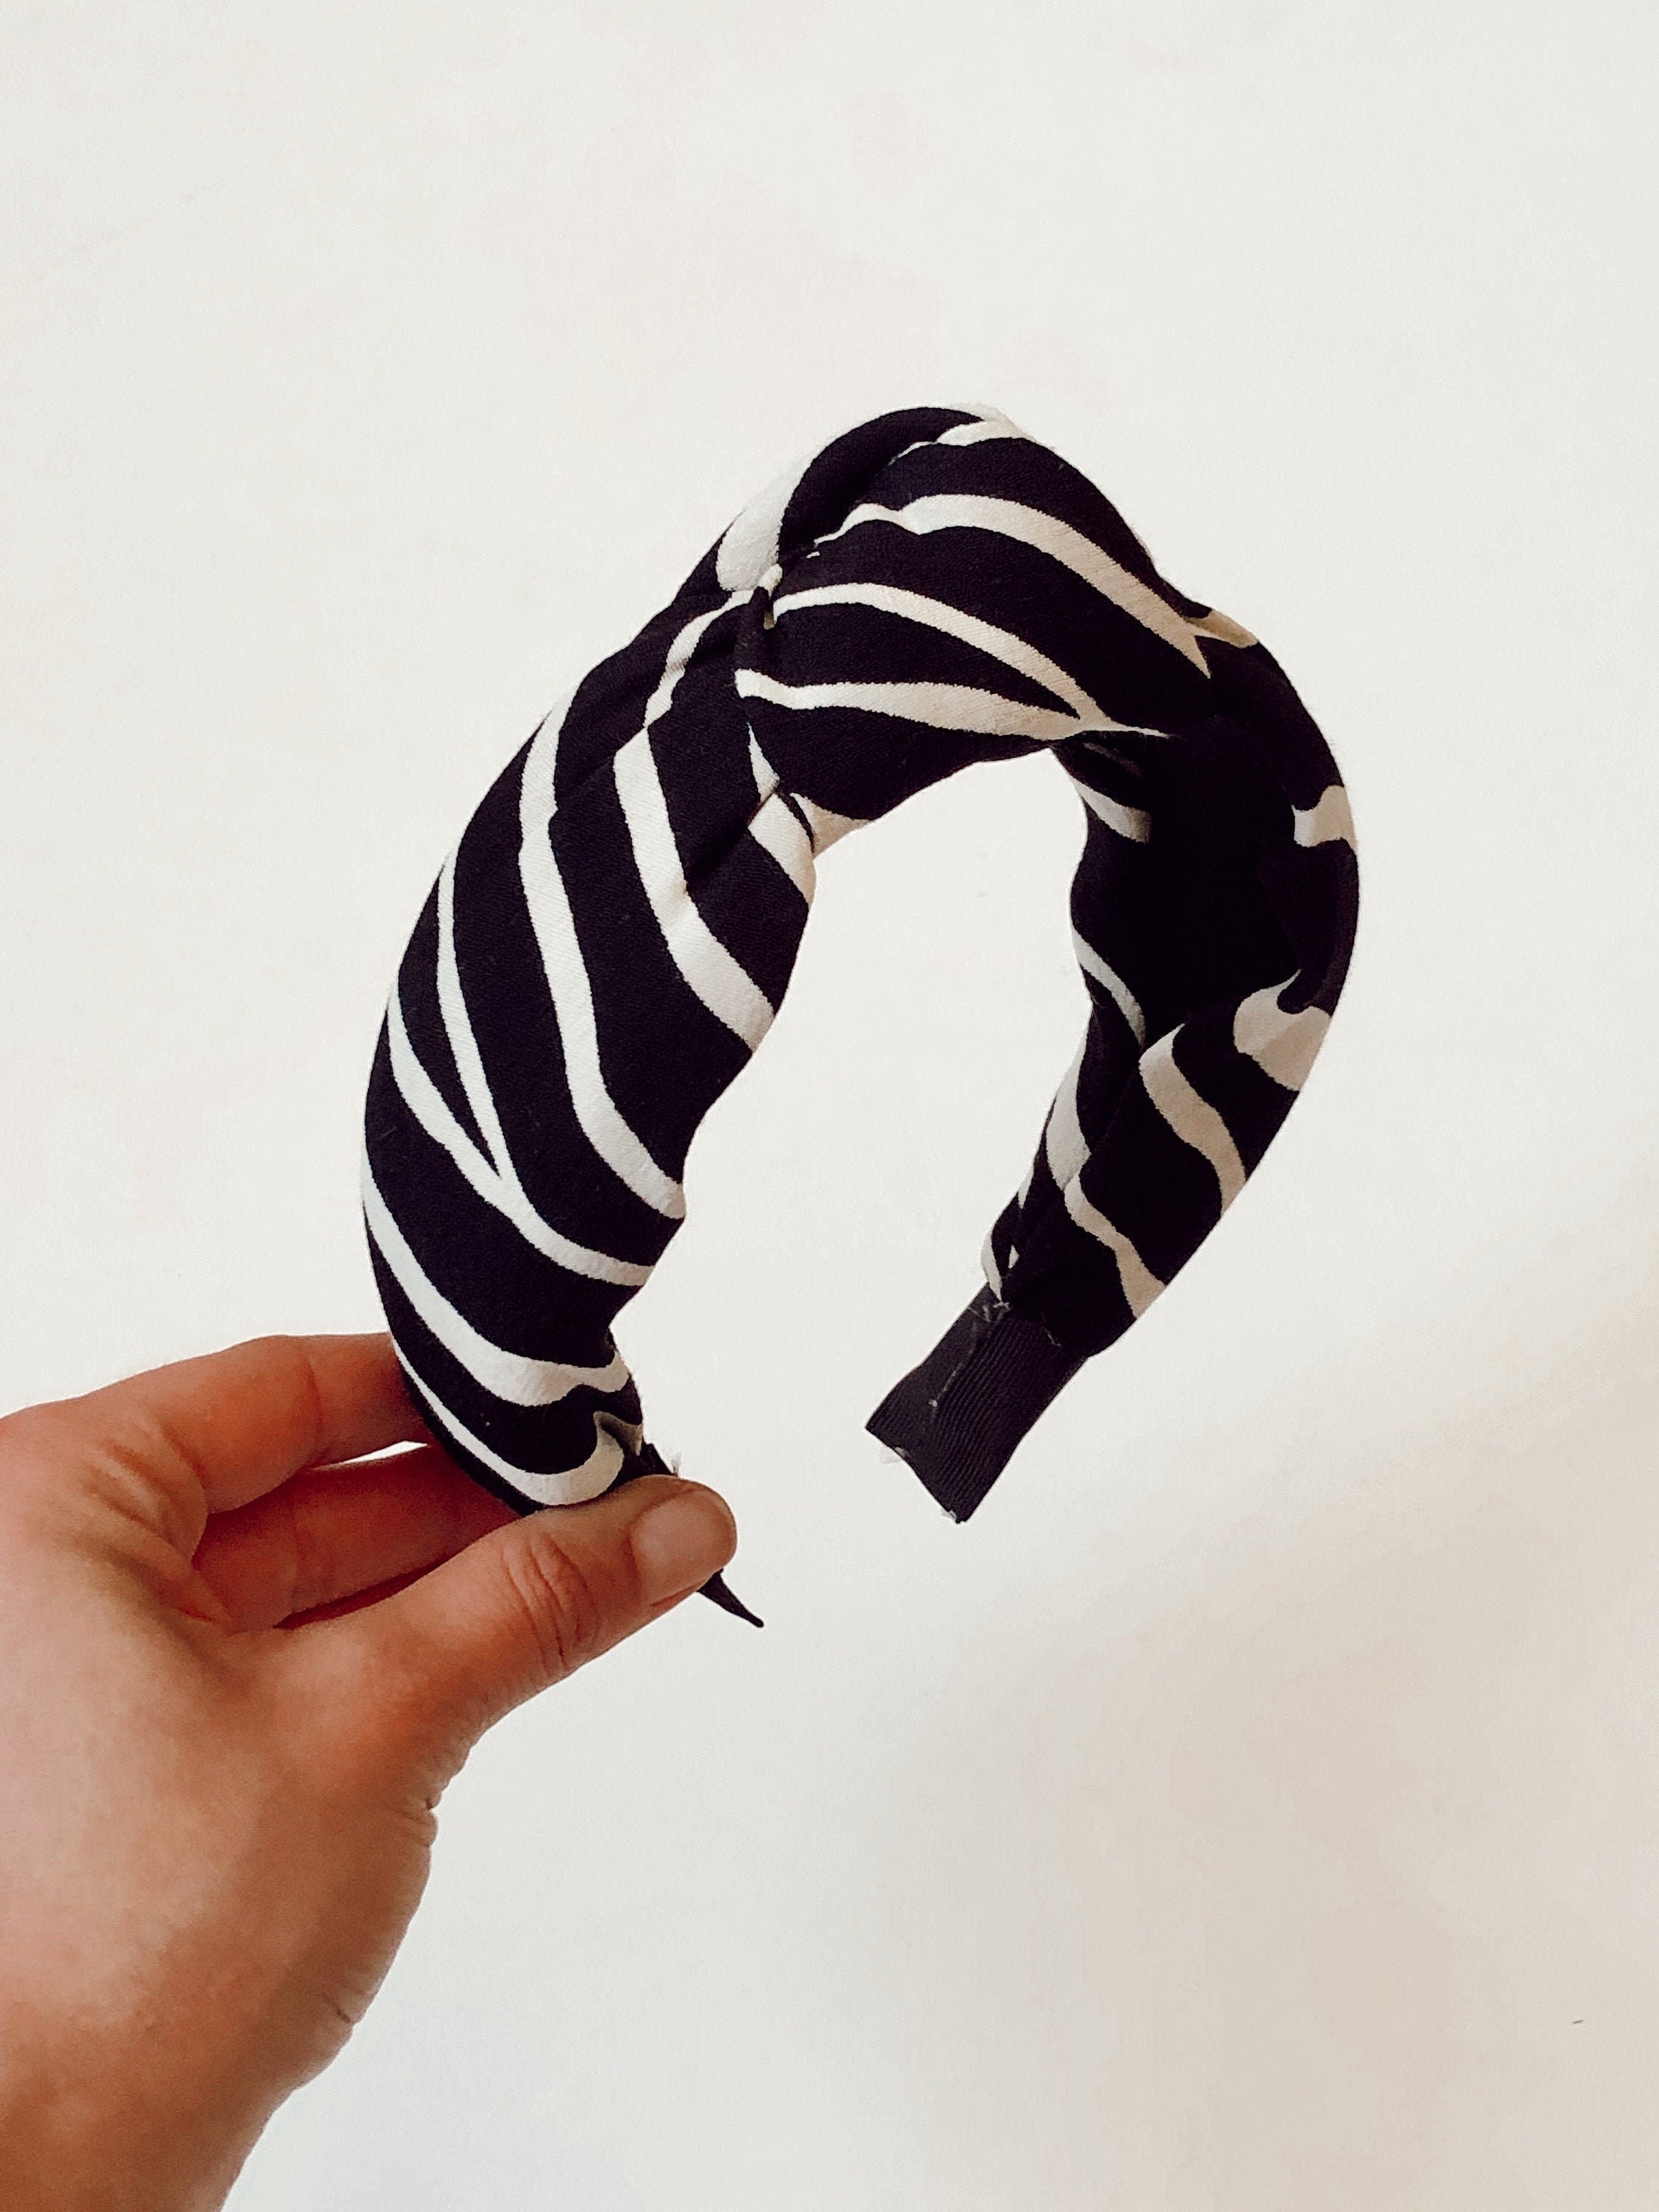 Stay on-trend with this stylish knotted headband in a classic off-white and black color scheme.